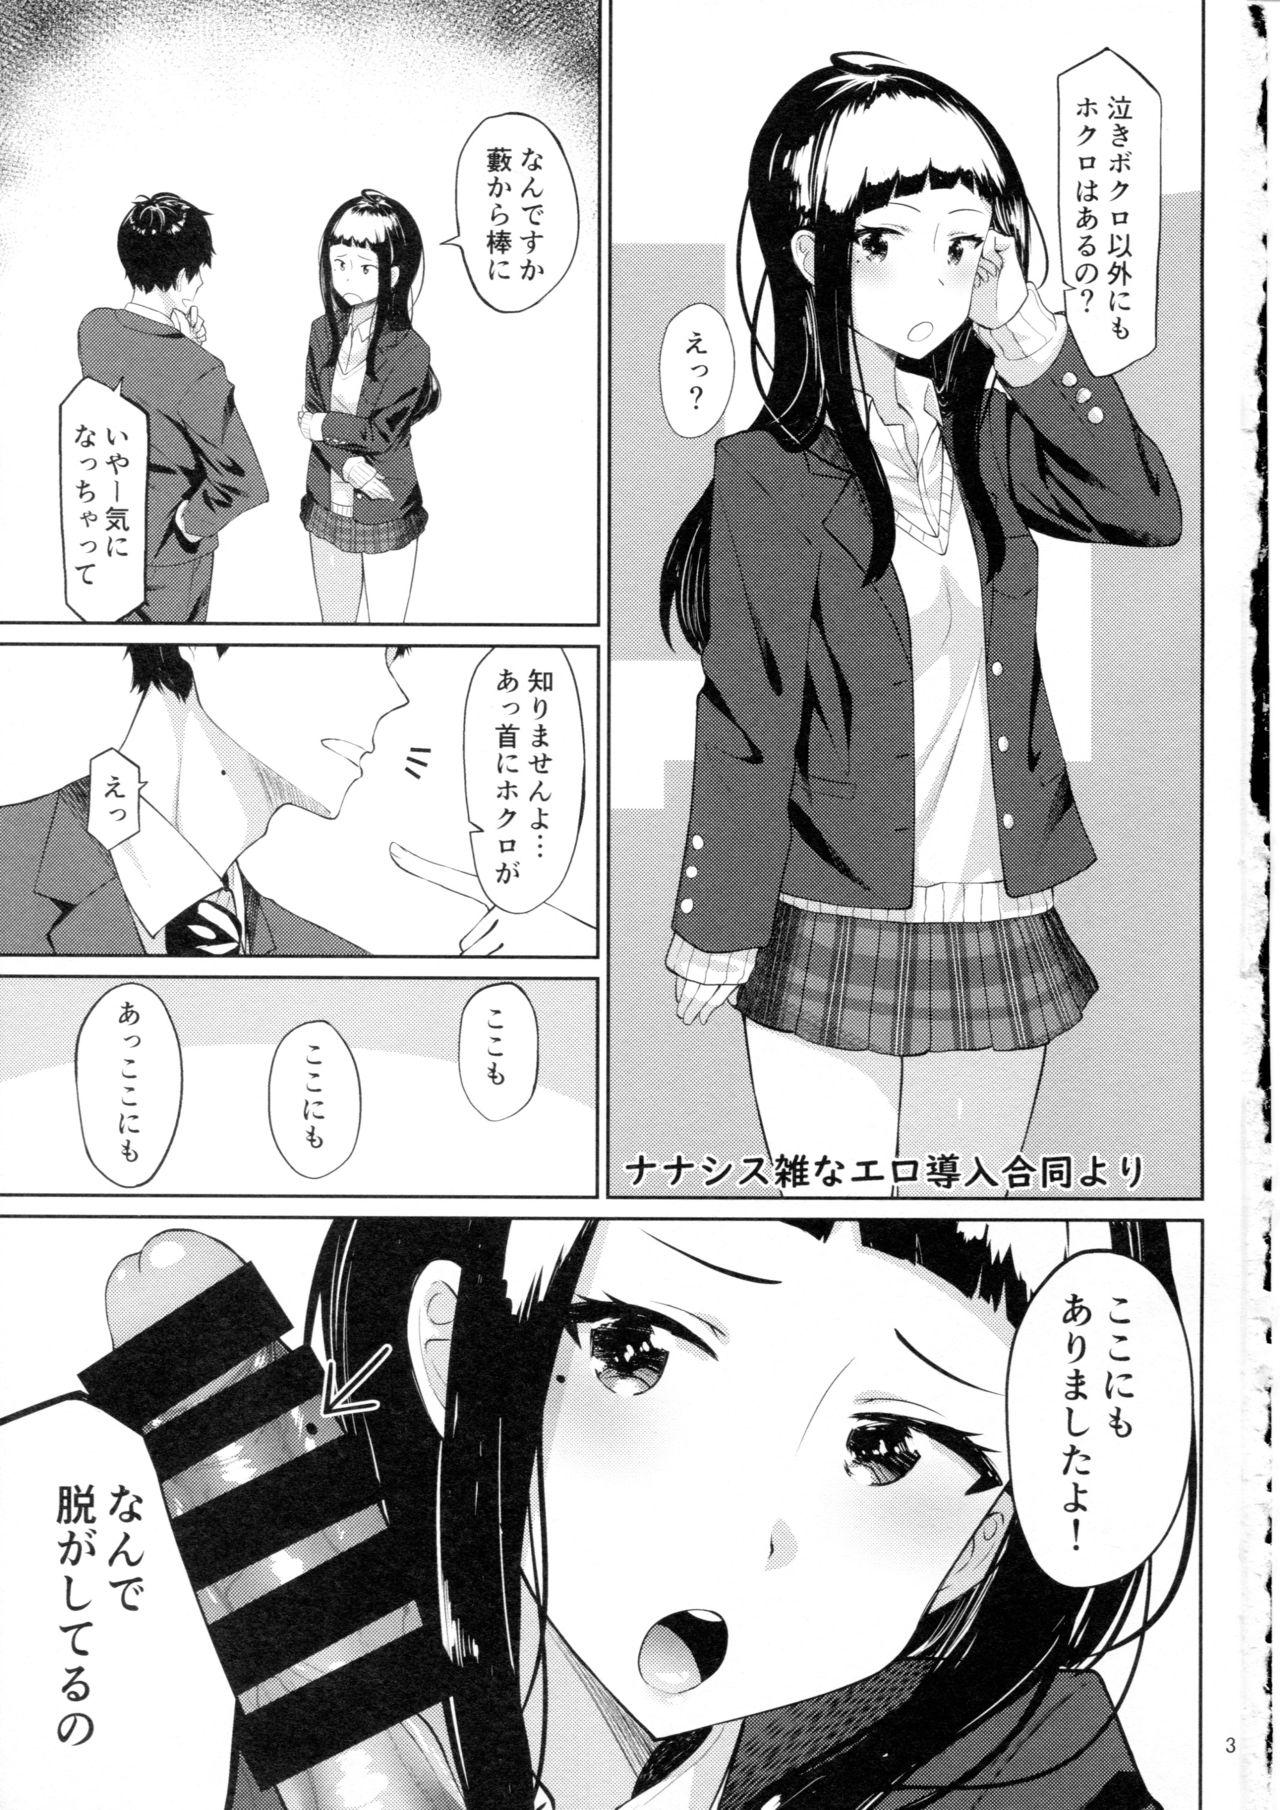 Gay Uniform D.EMOTION - Tokyo 7th sisters Girlfriend - Page 2